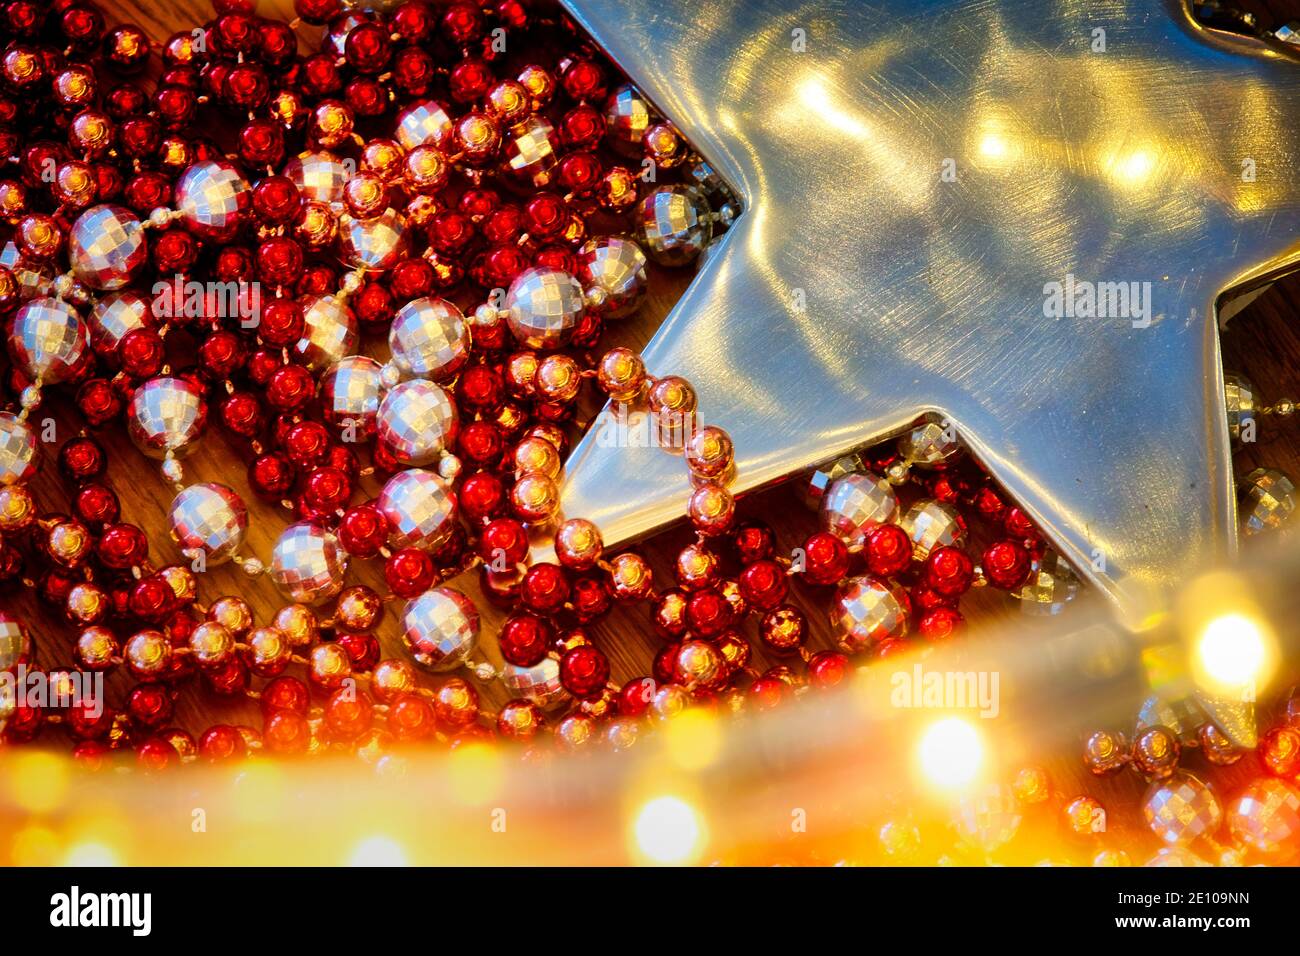 CHRISTMAS CONCEPT: Merry Christmas | Frohe Weihnachten Stock Photo